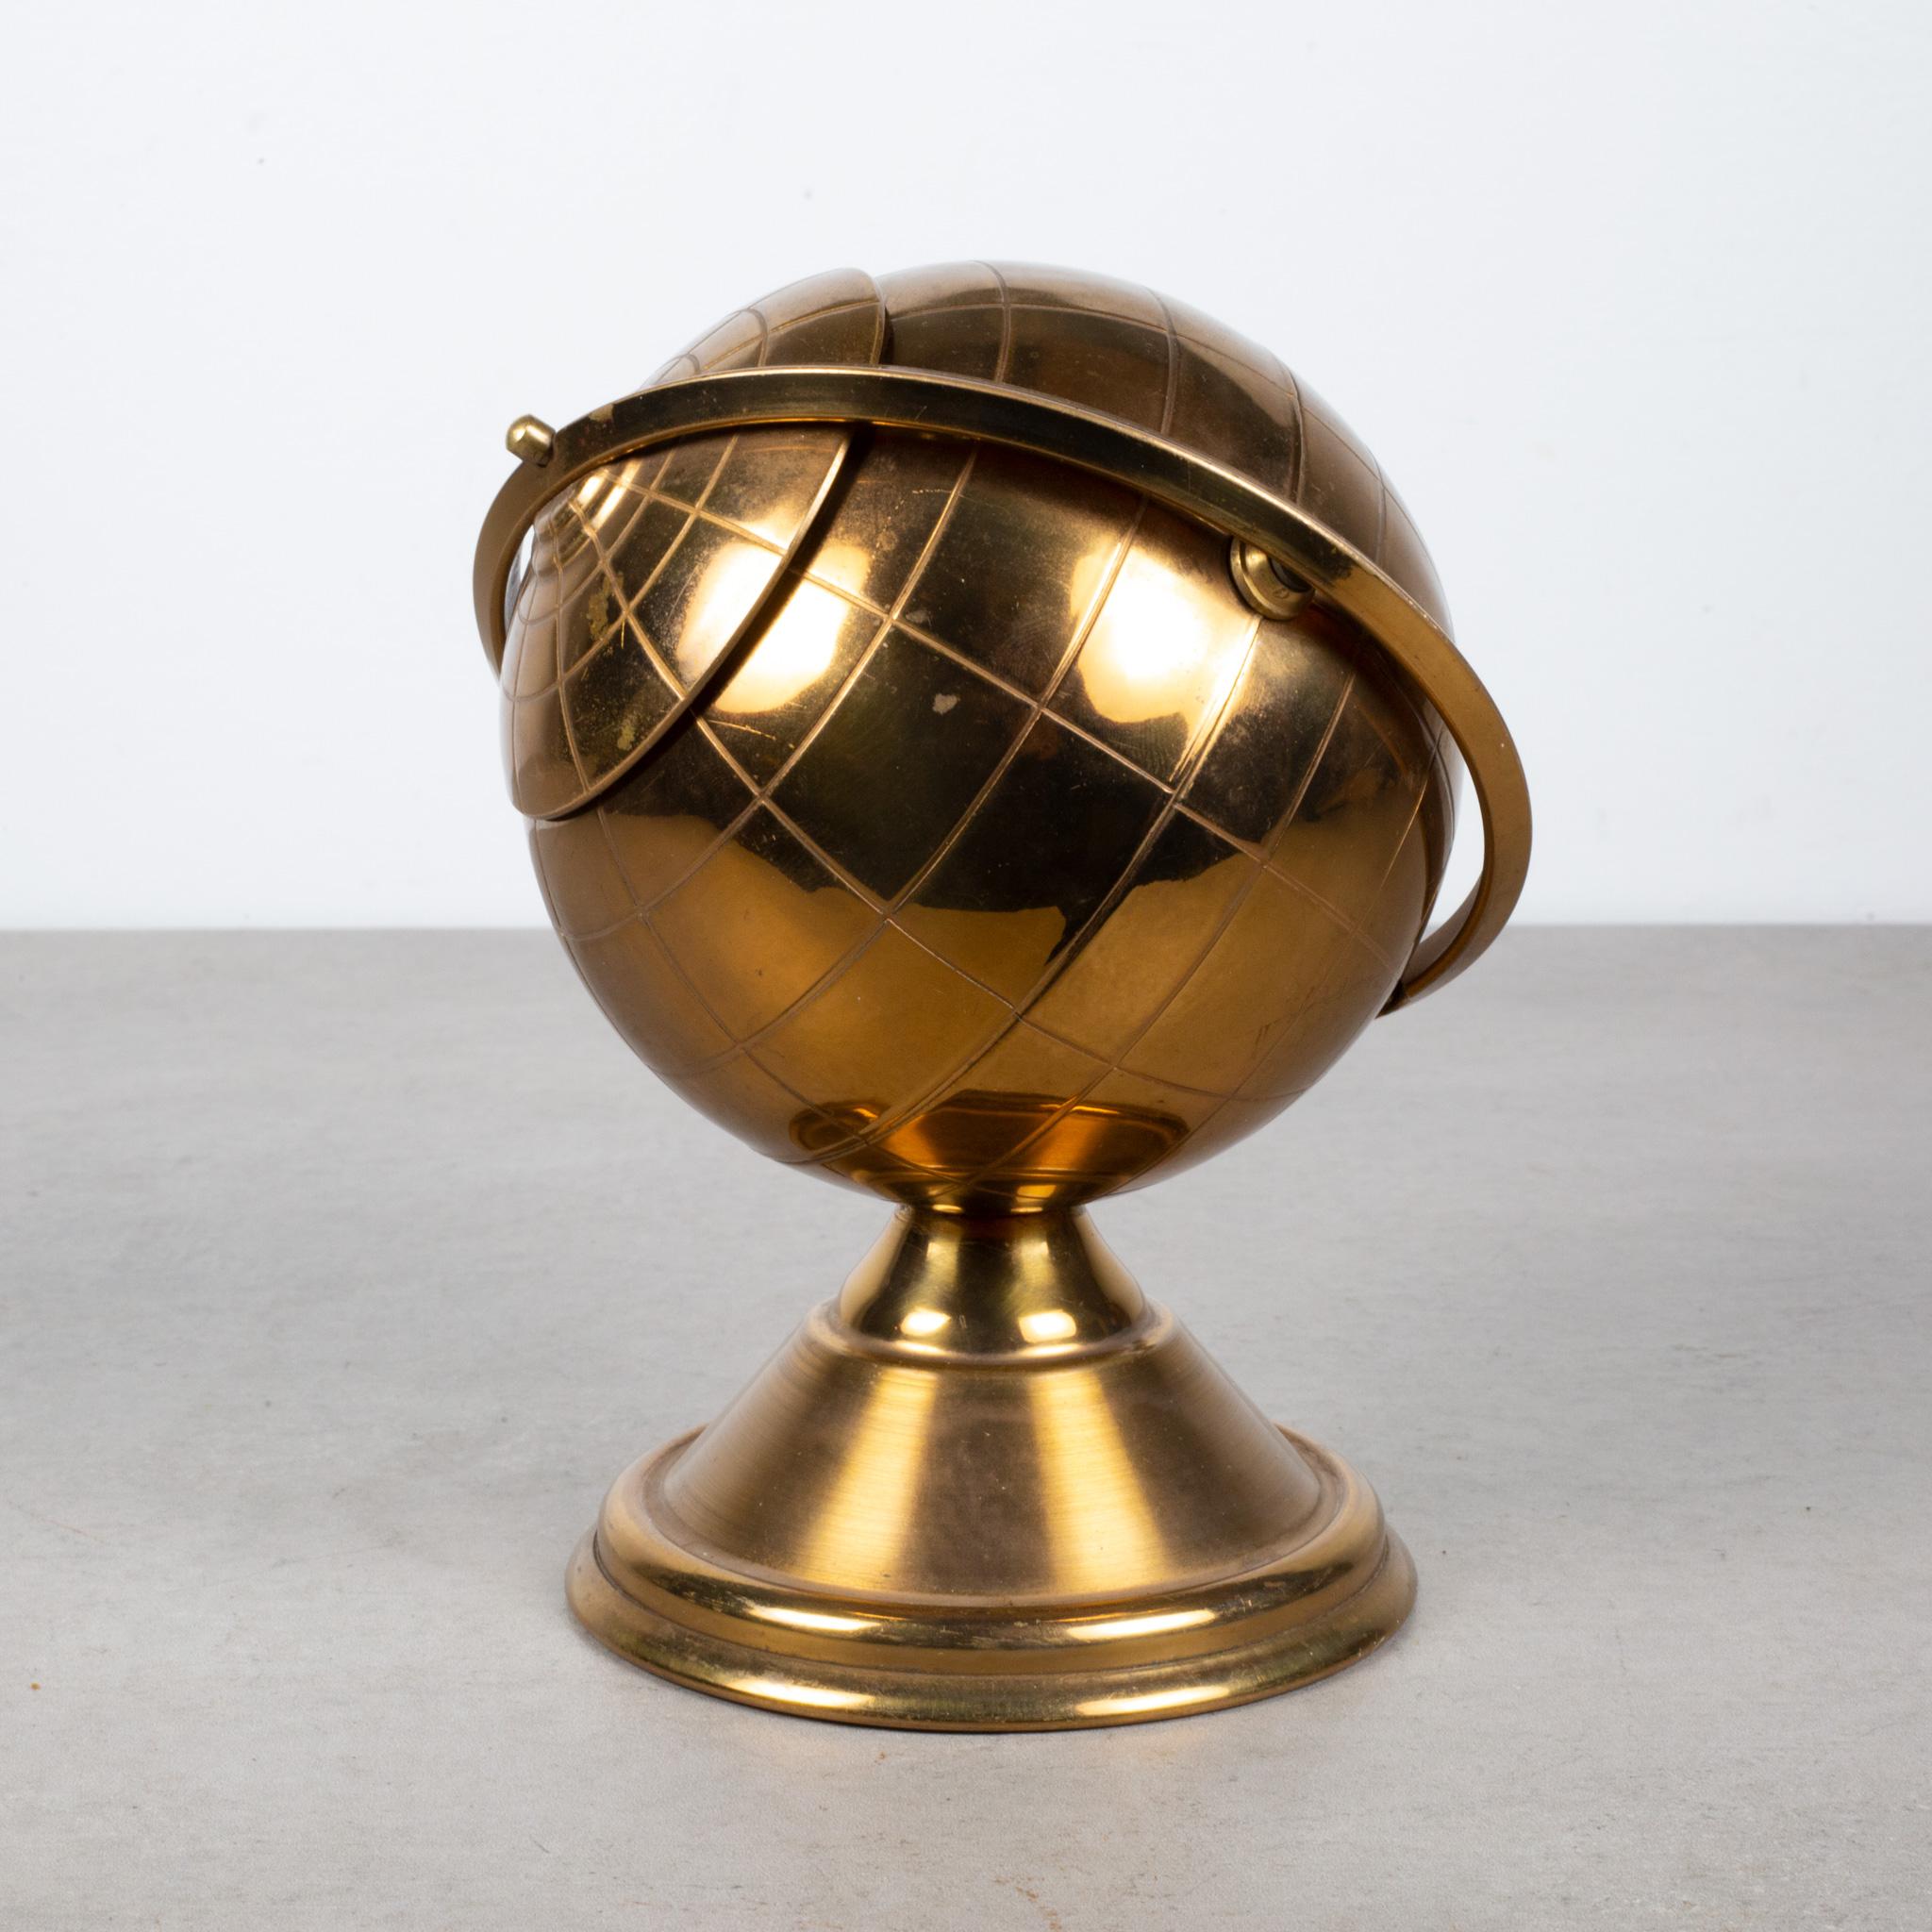 ABOUT

This is an original midcentury brass cigarette holder. The lid slides open on the globe's axis to reveal a metal interior designed to hold cigarettes. This globe is unique because it has a leather nameplate on the bottom. This piece has